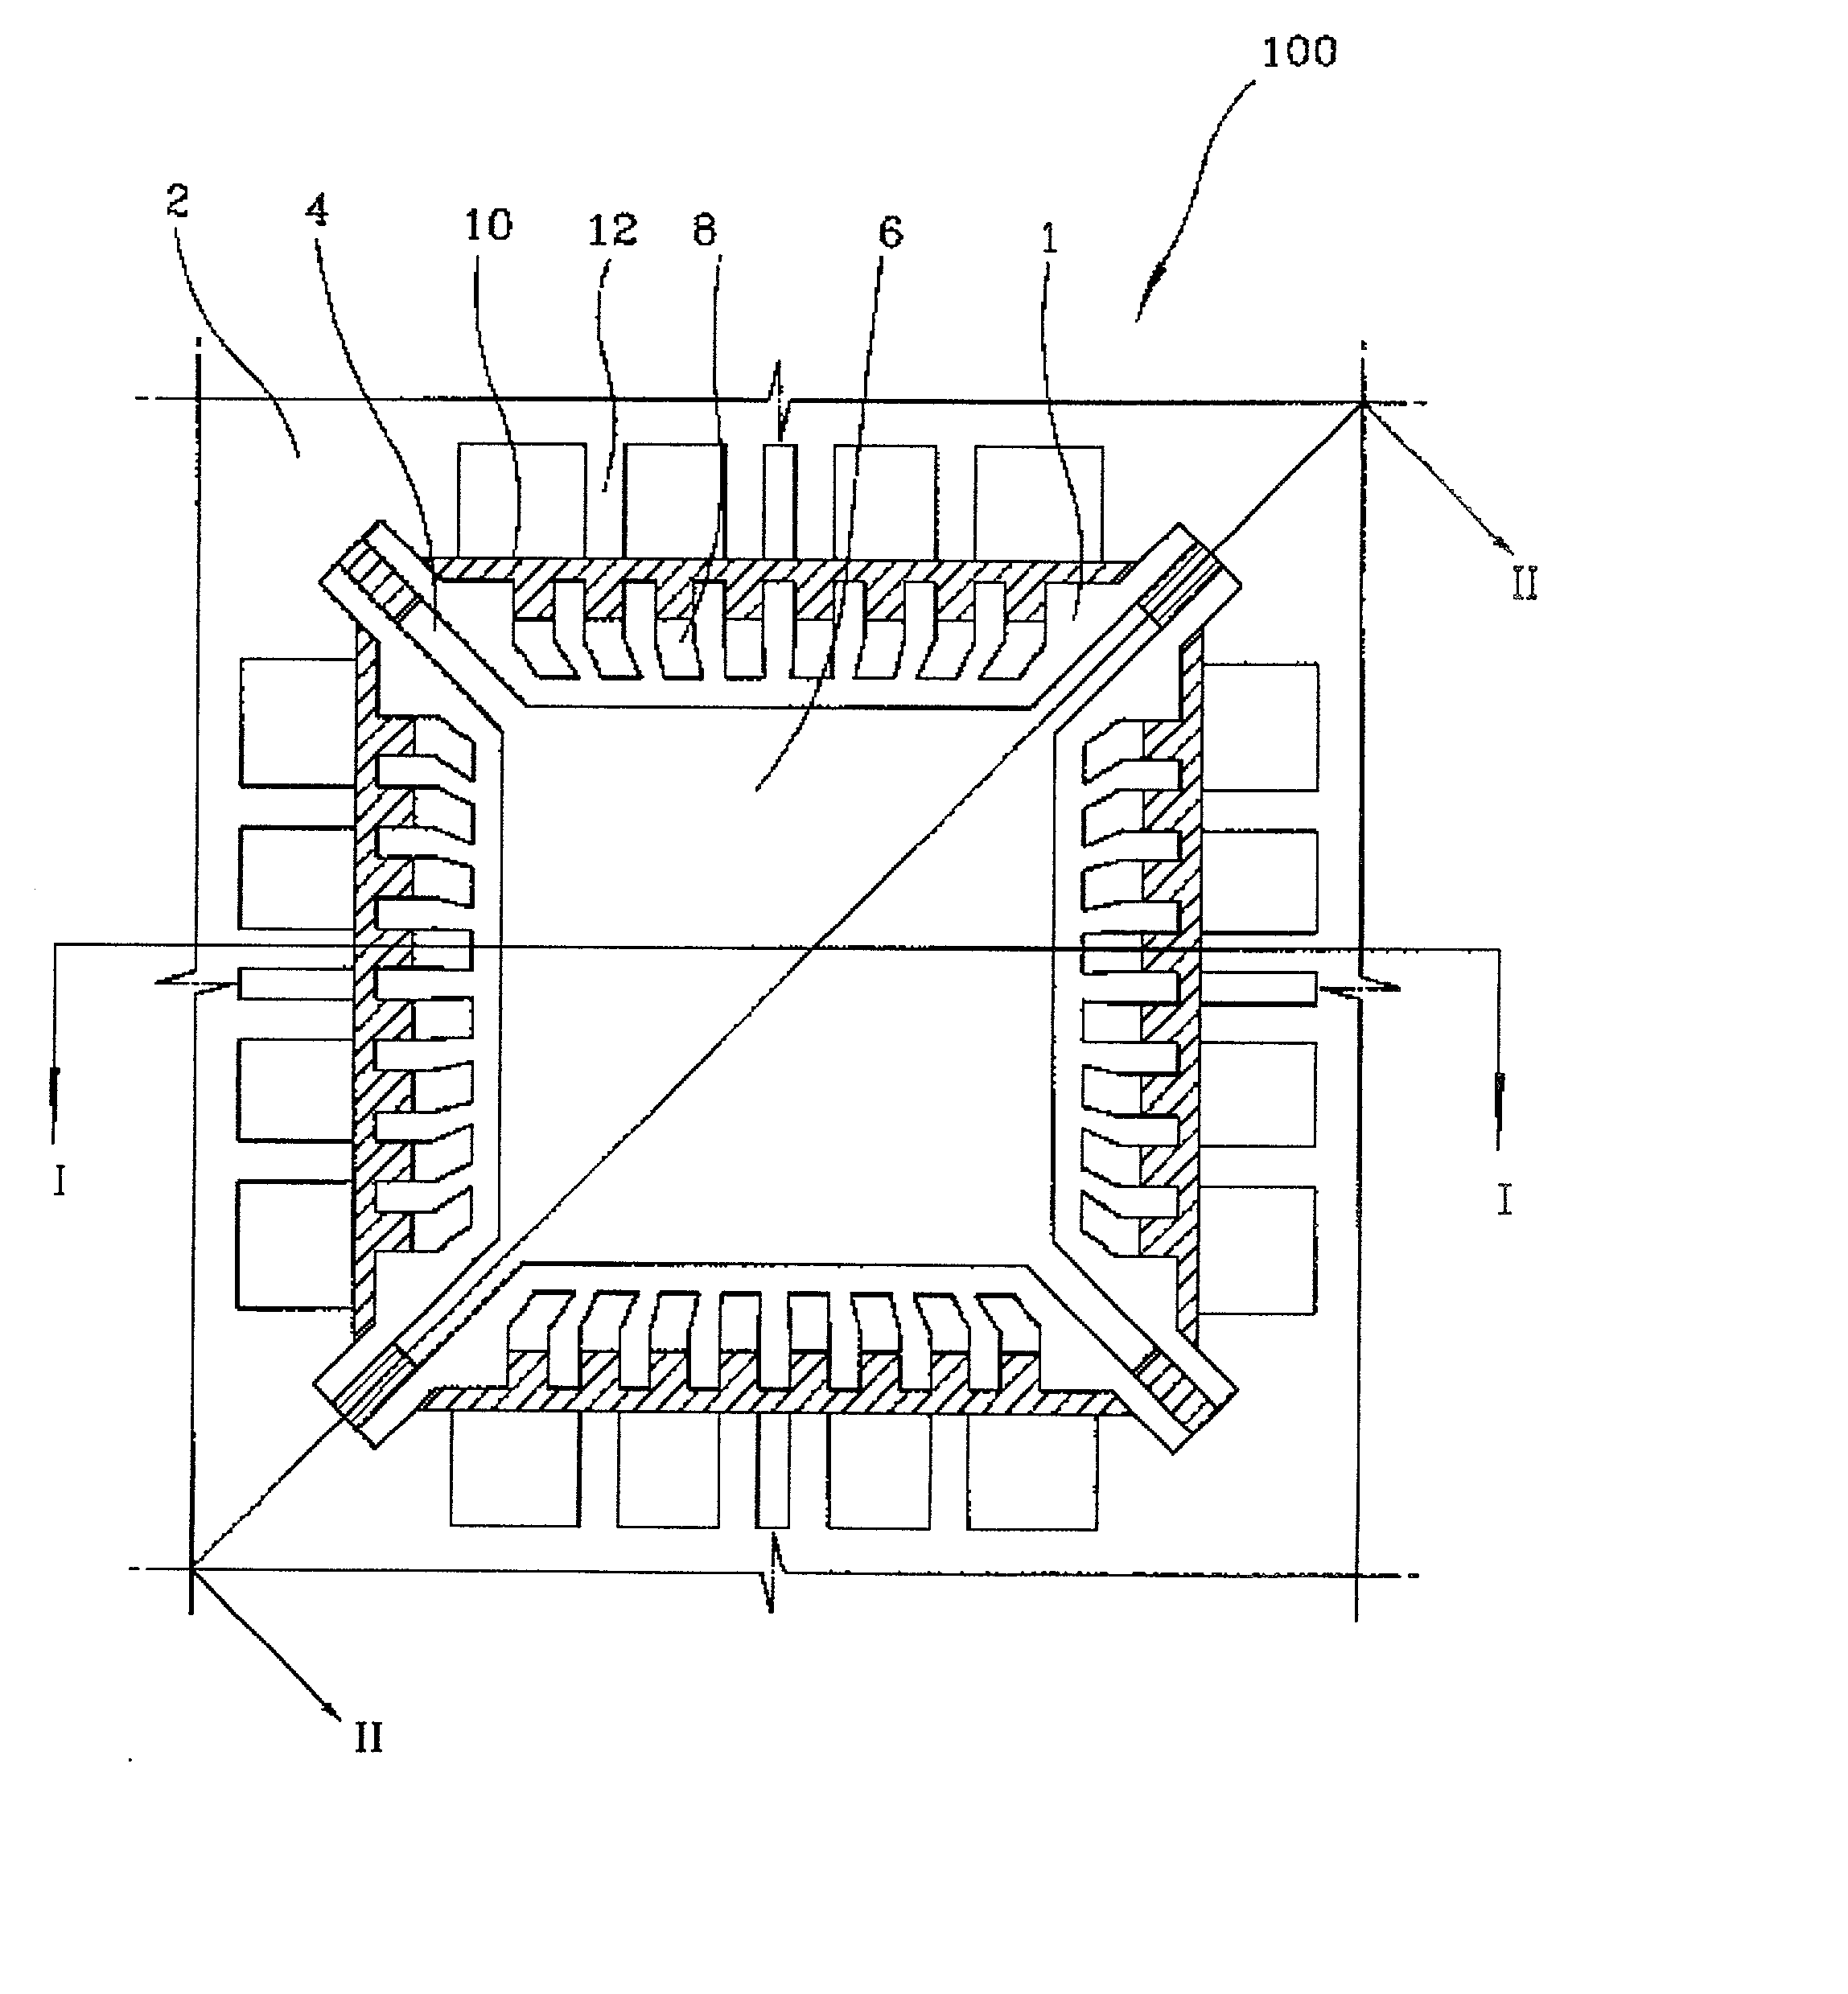 Semiconductor package with lead frame